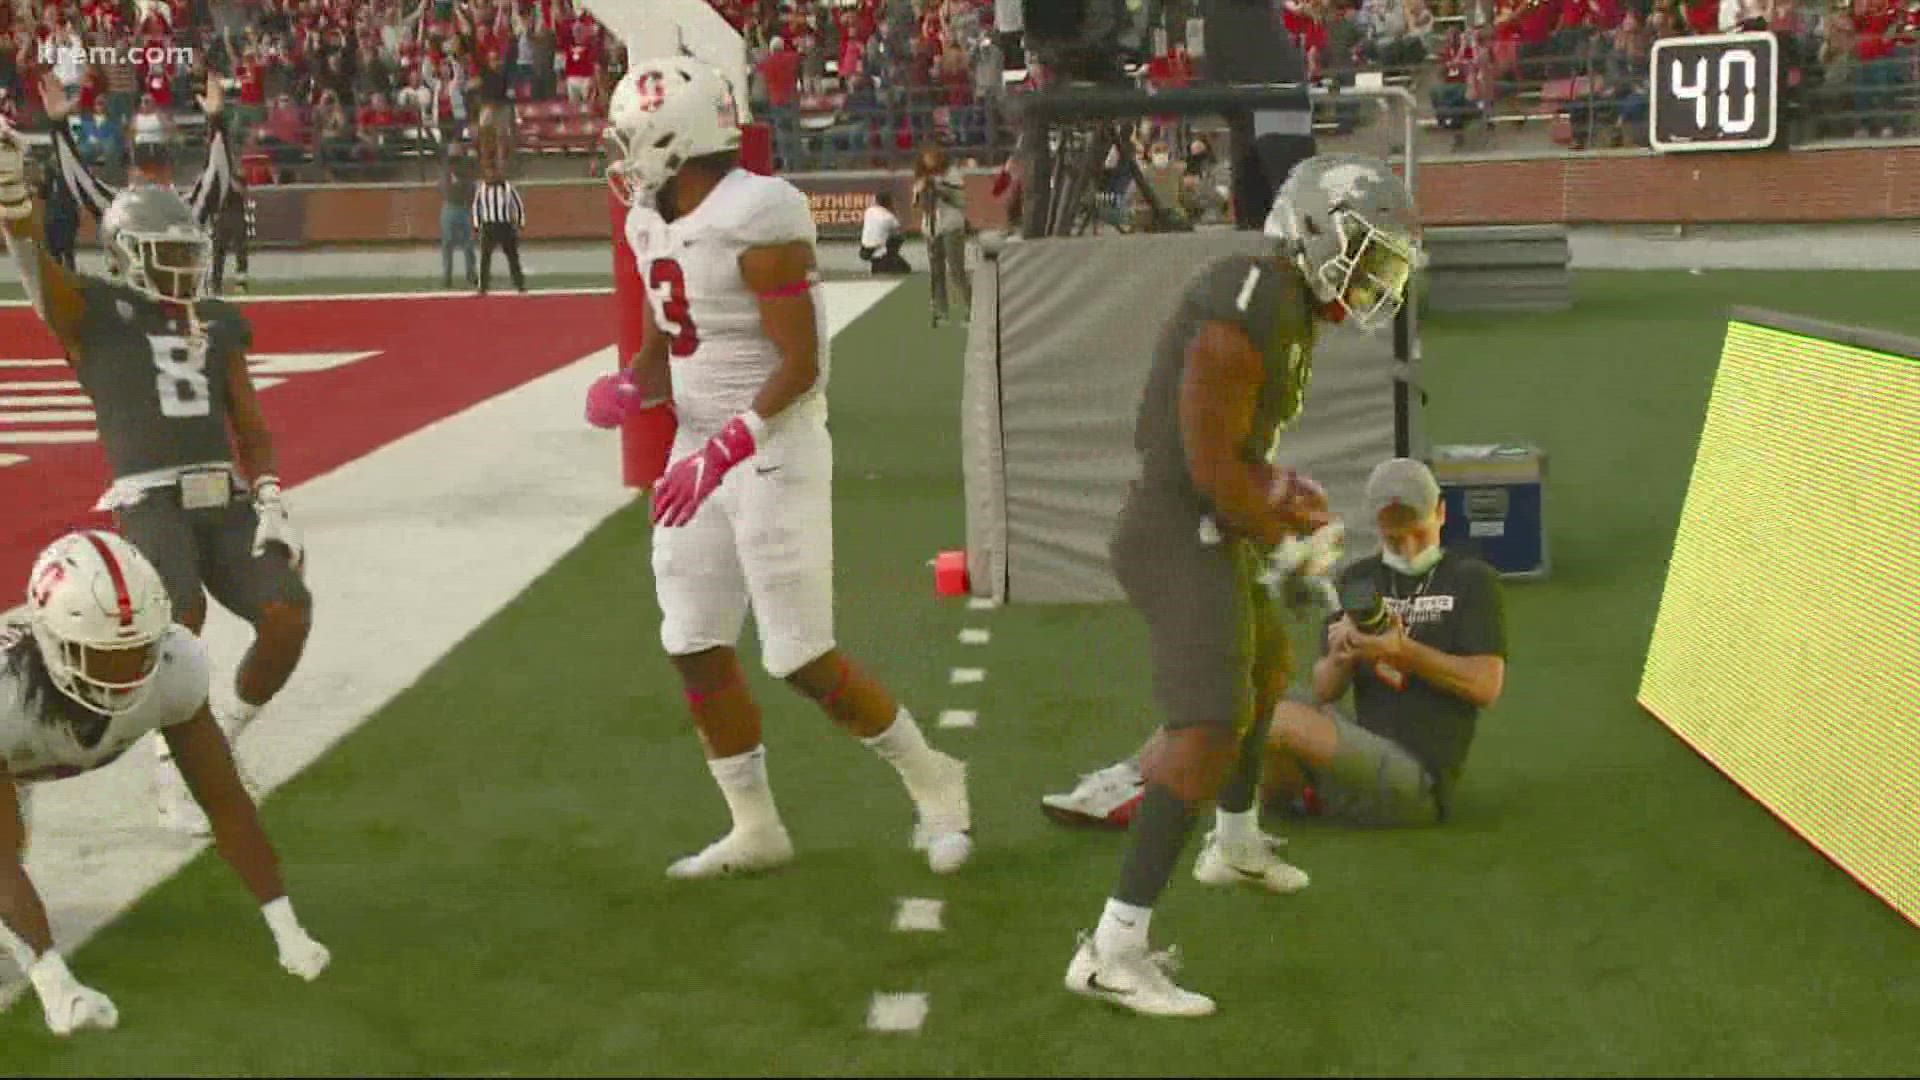 Washington State won yet another thriller out in Pullman 34-31 over Stanford.